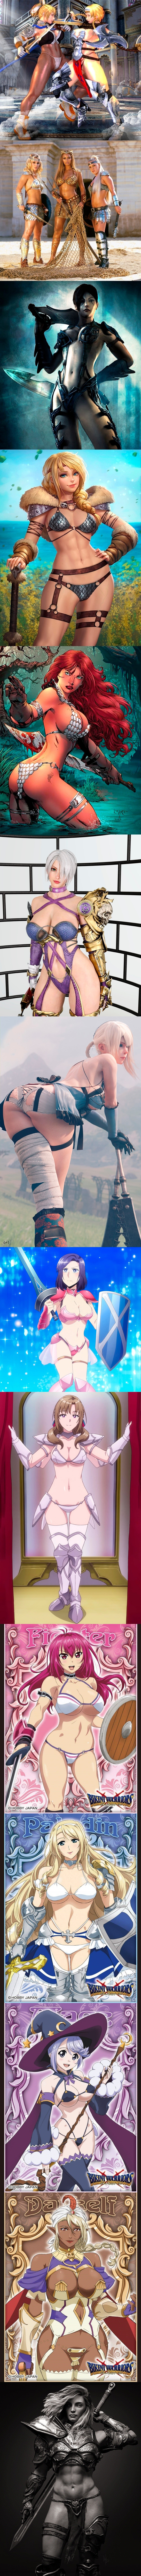 I'm a simple man with simple things who only likes one thing and one thing only "BIKINI ARMOR" hence i compiled a comprehensive list of old retro anime and new modern anime that prominently feature what i like to perfectly describe as "BIKINI ARMOR".